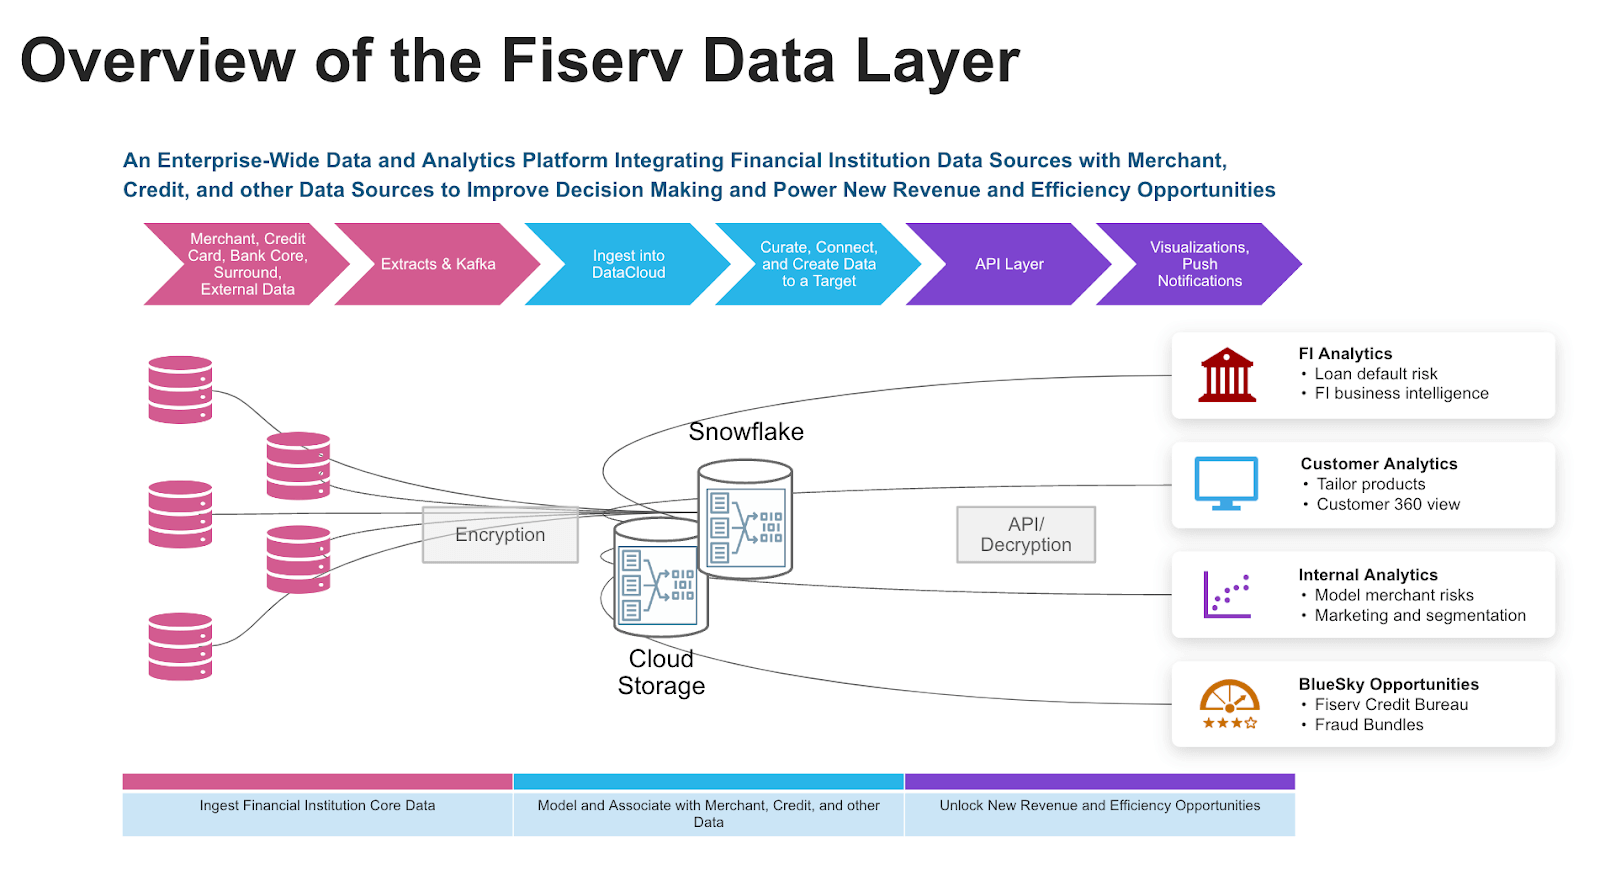 Slide showing overview of the Fiserv data layer